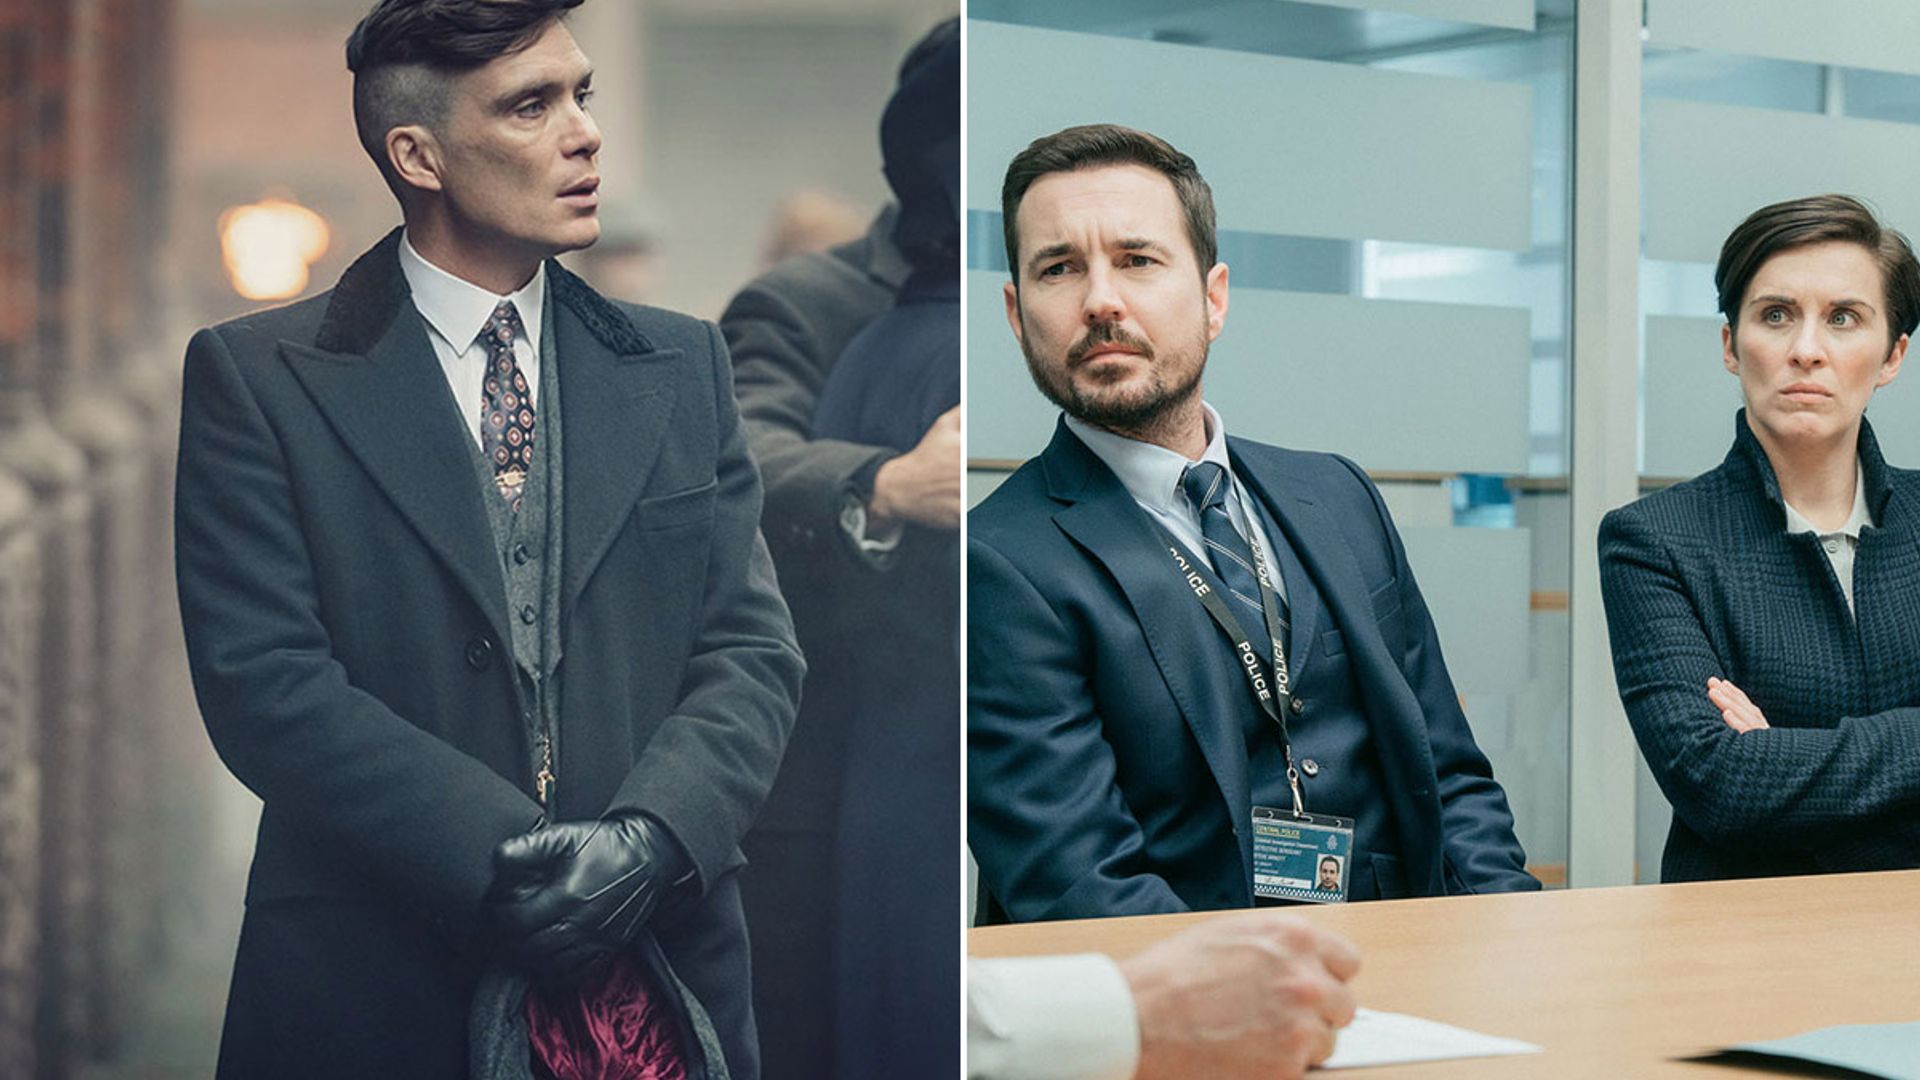 line of duty and peaky blinders cancelled